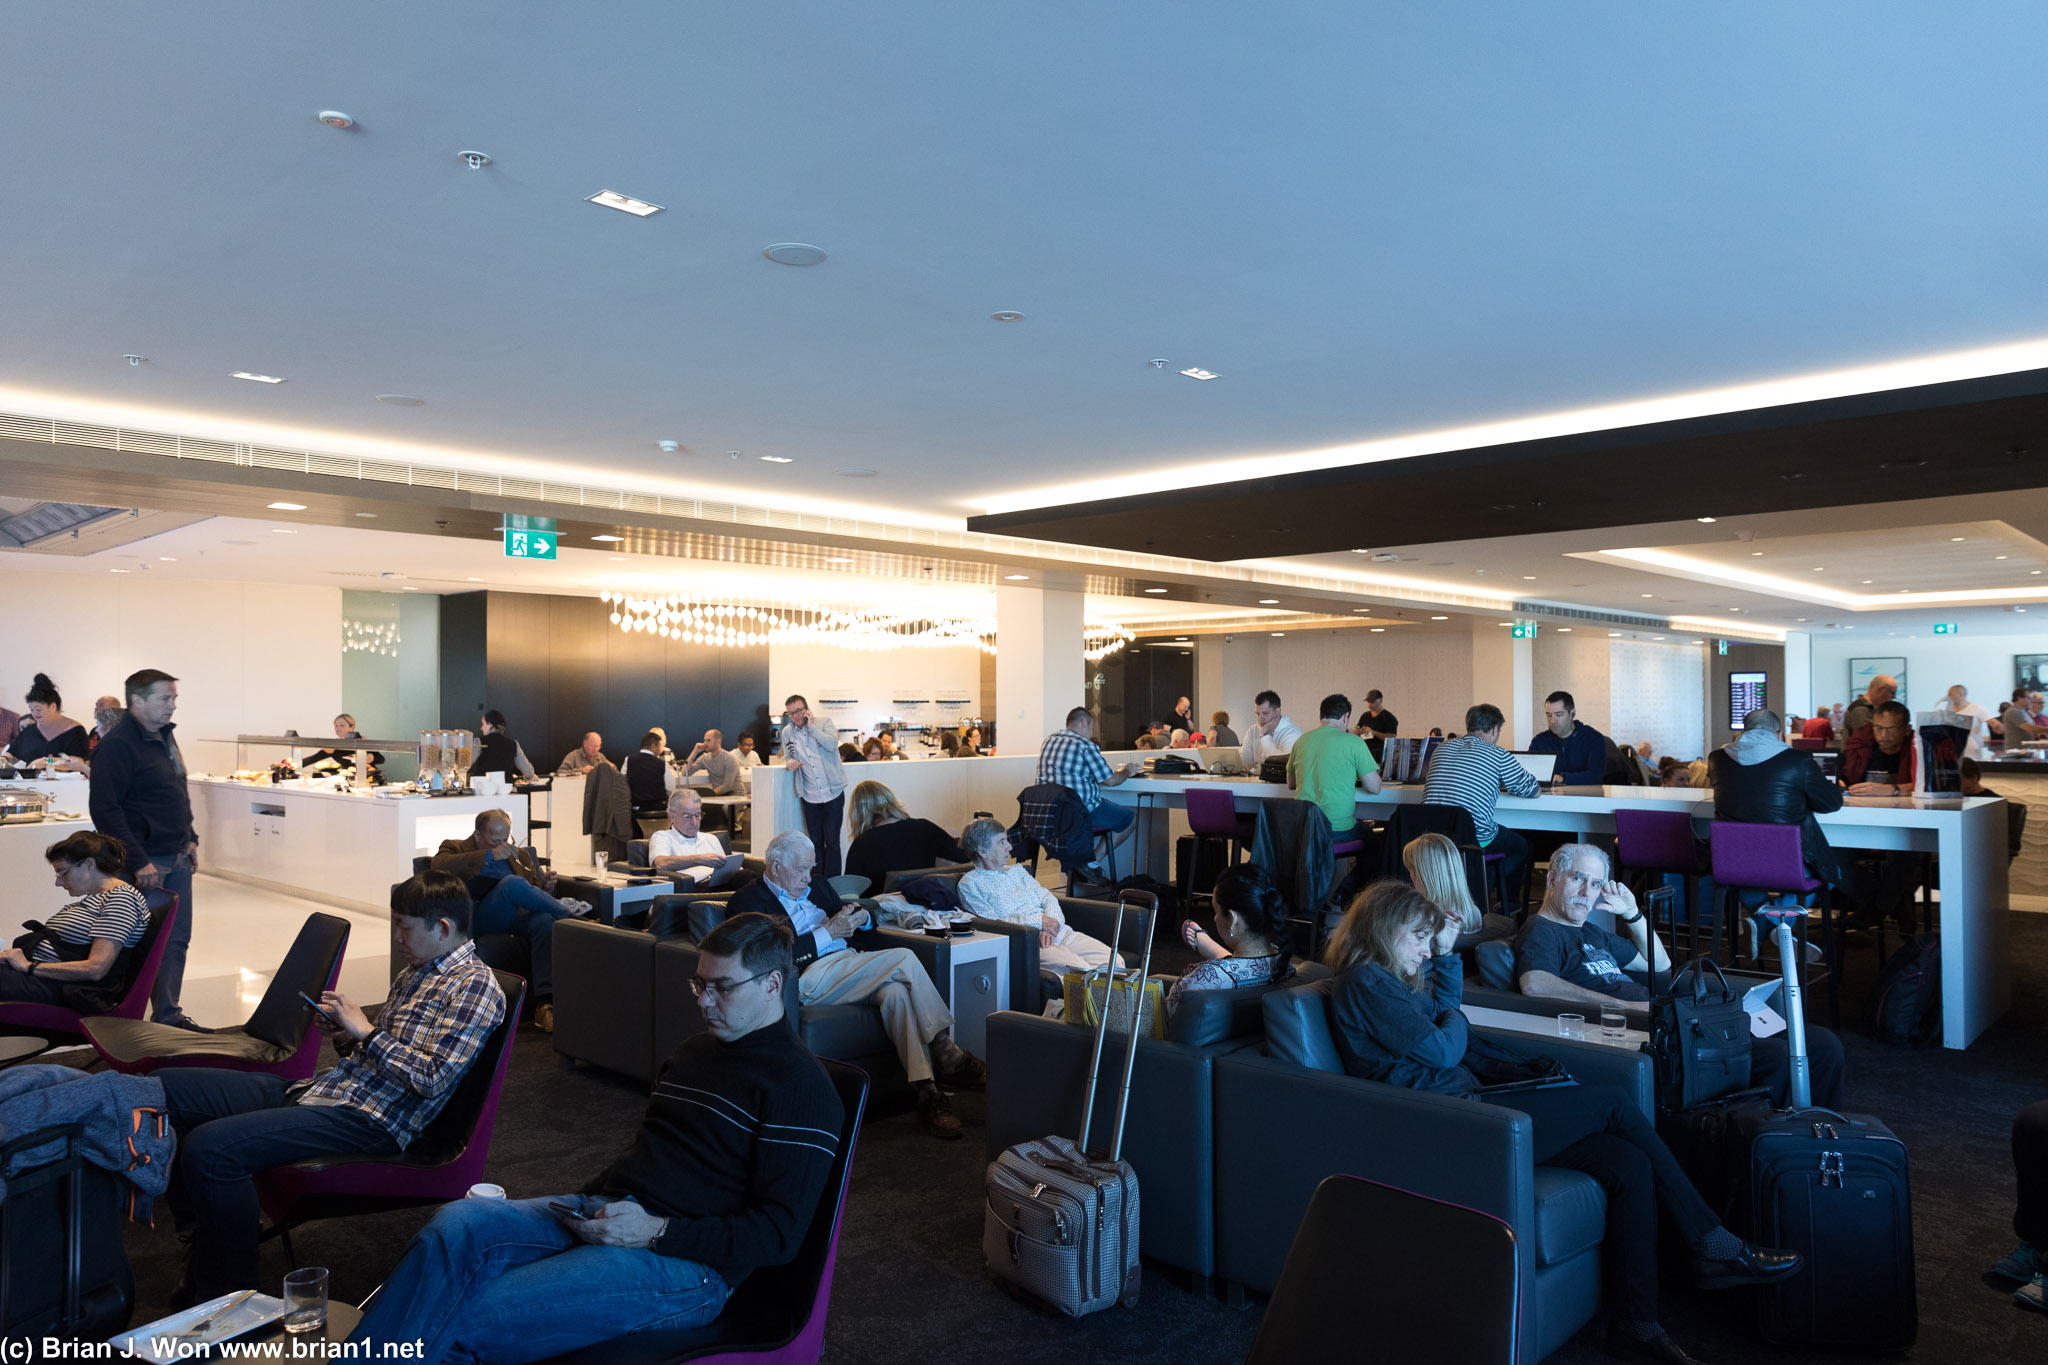 Air New Zealand lounge next door was way bigger... and way more crowded. Ick.